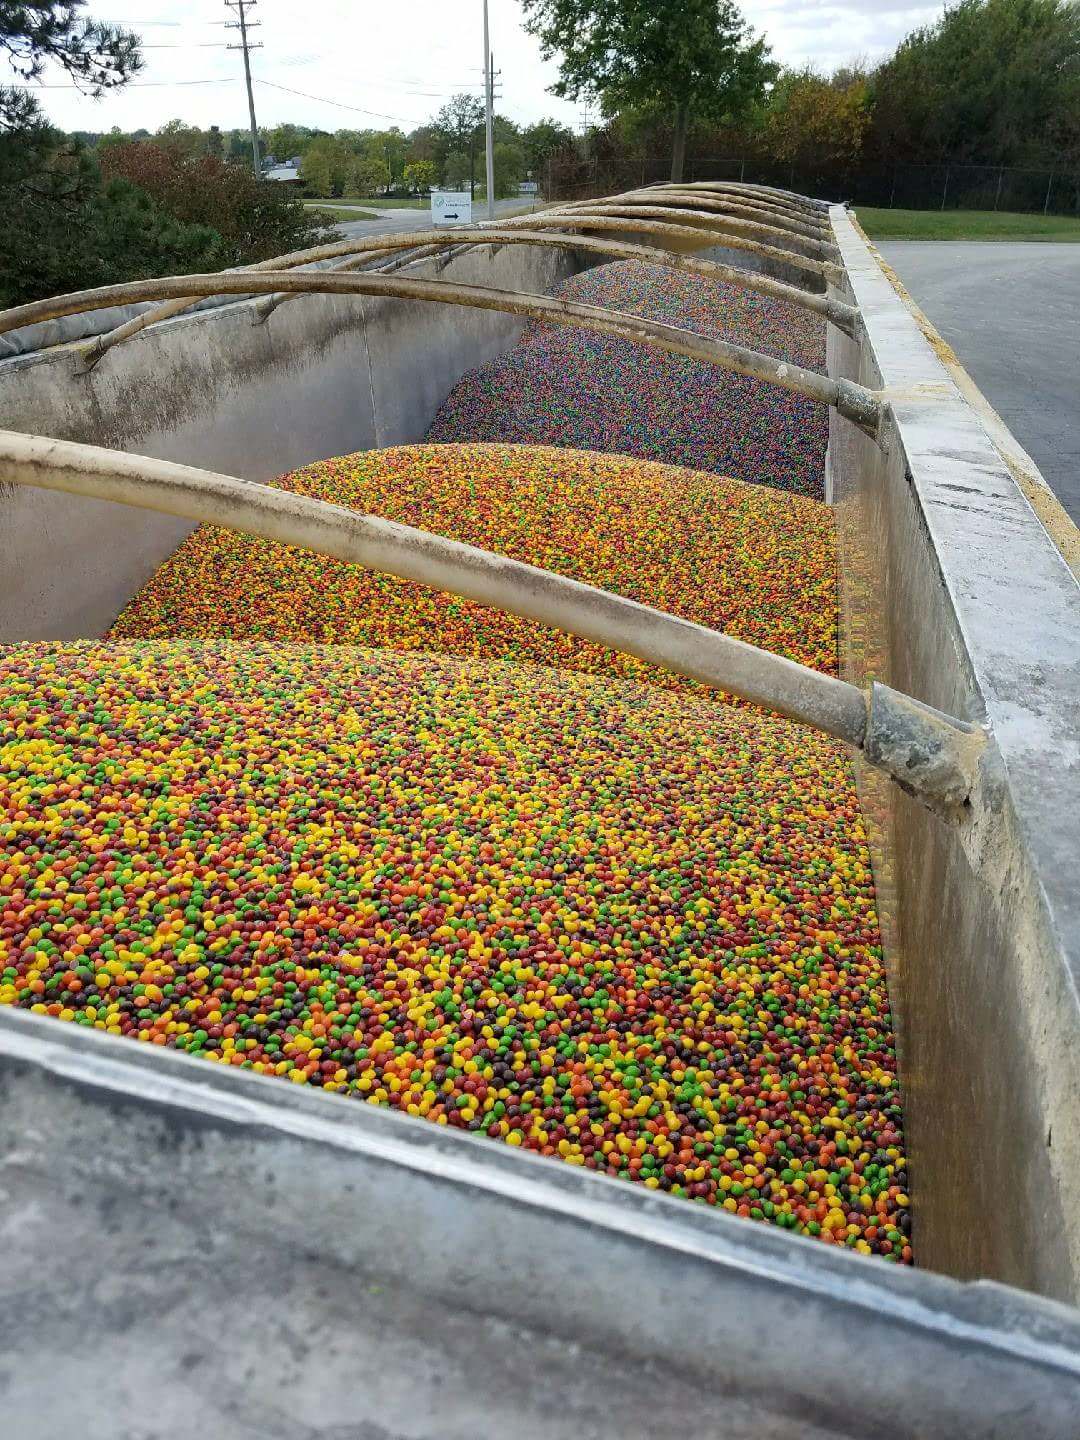 skittles for cows